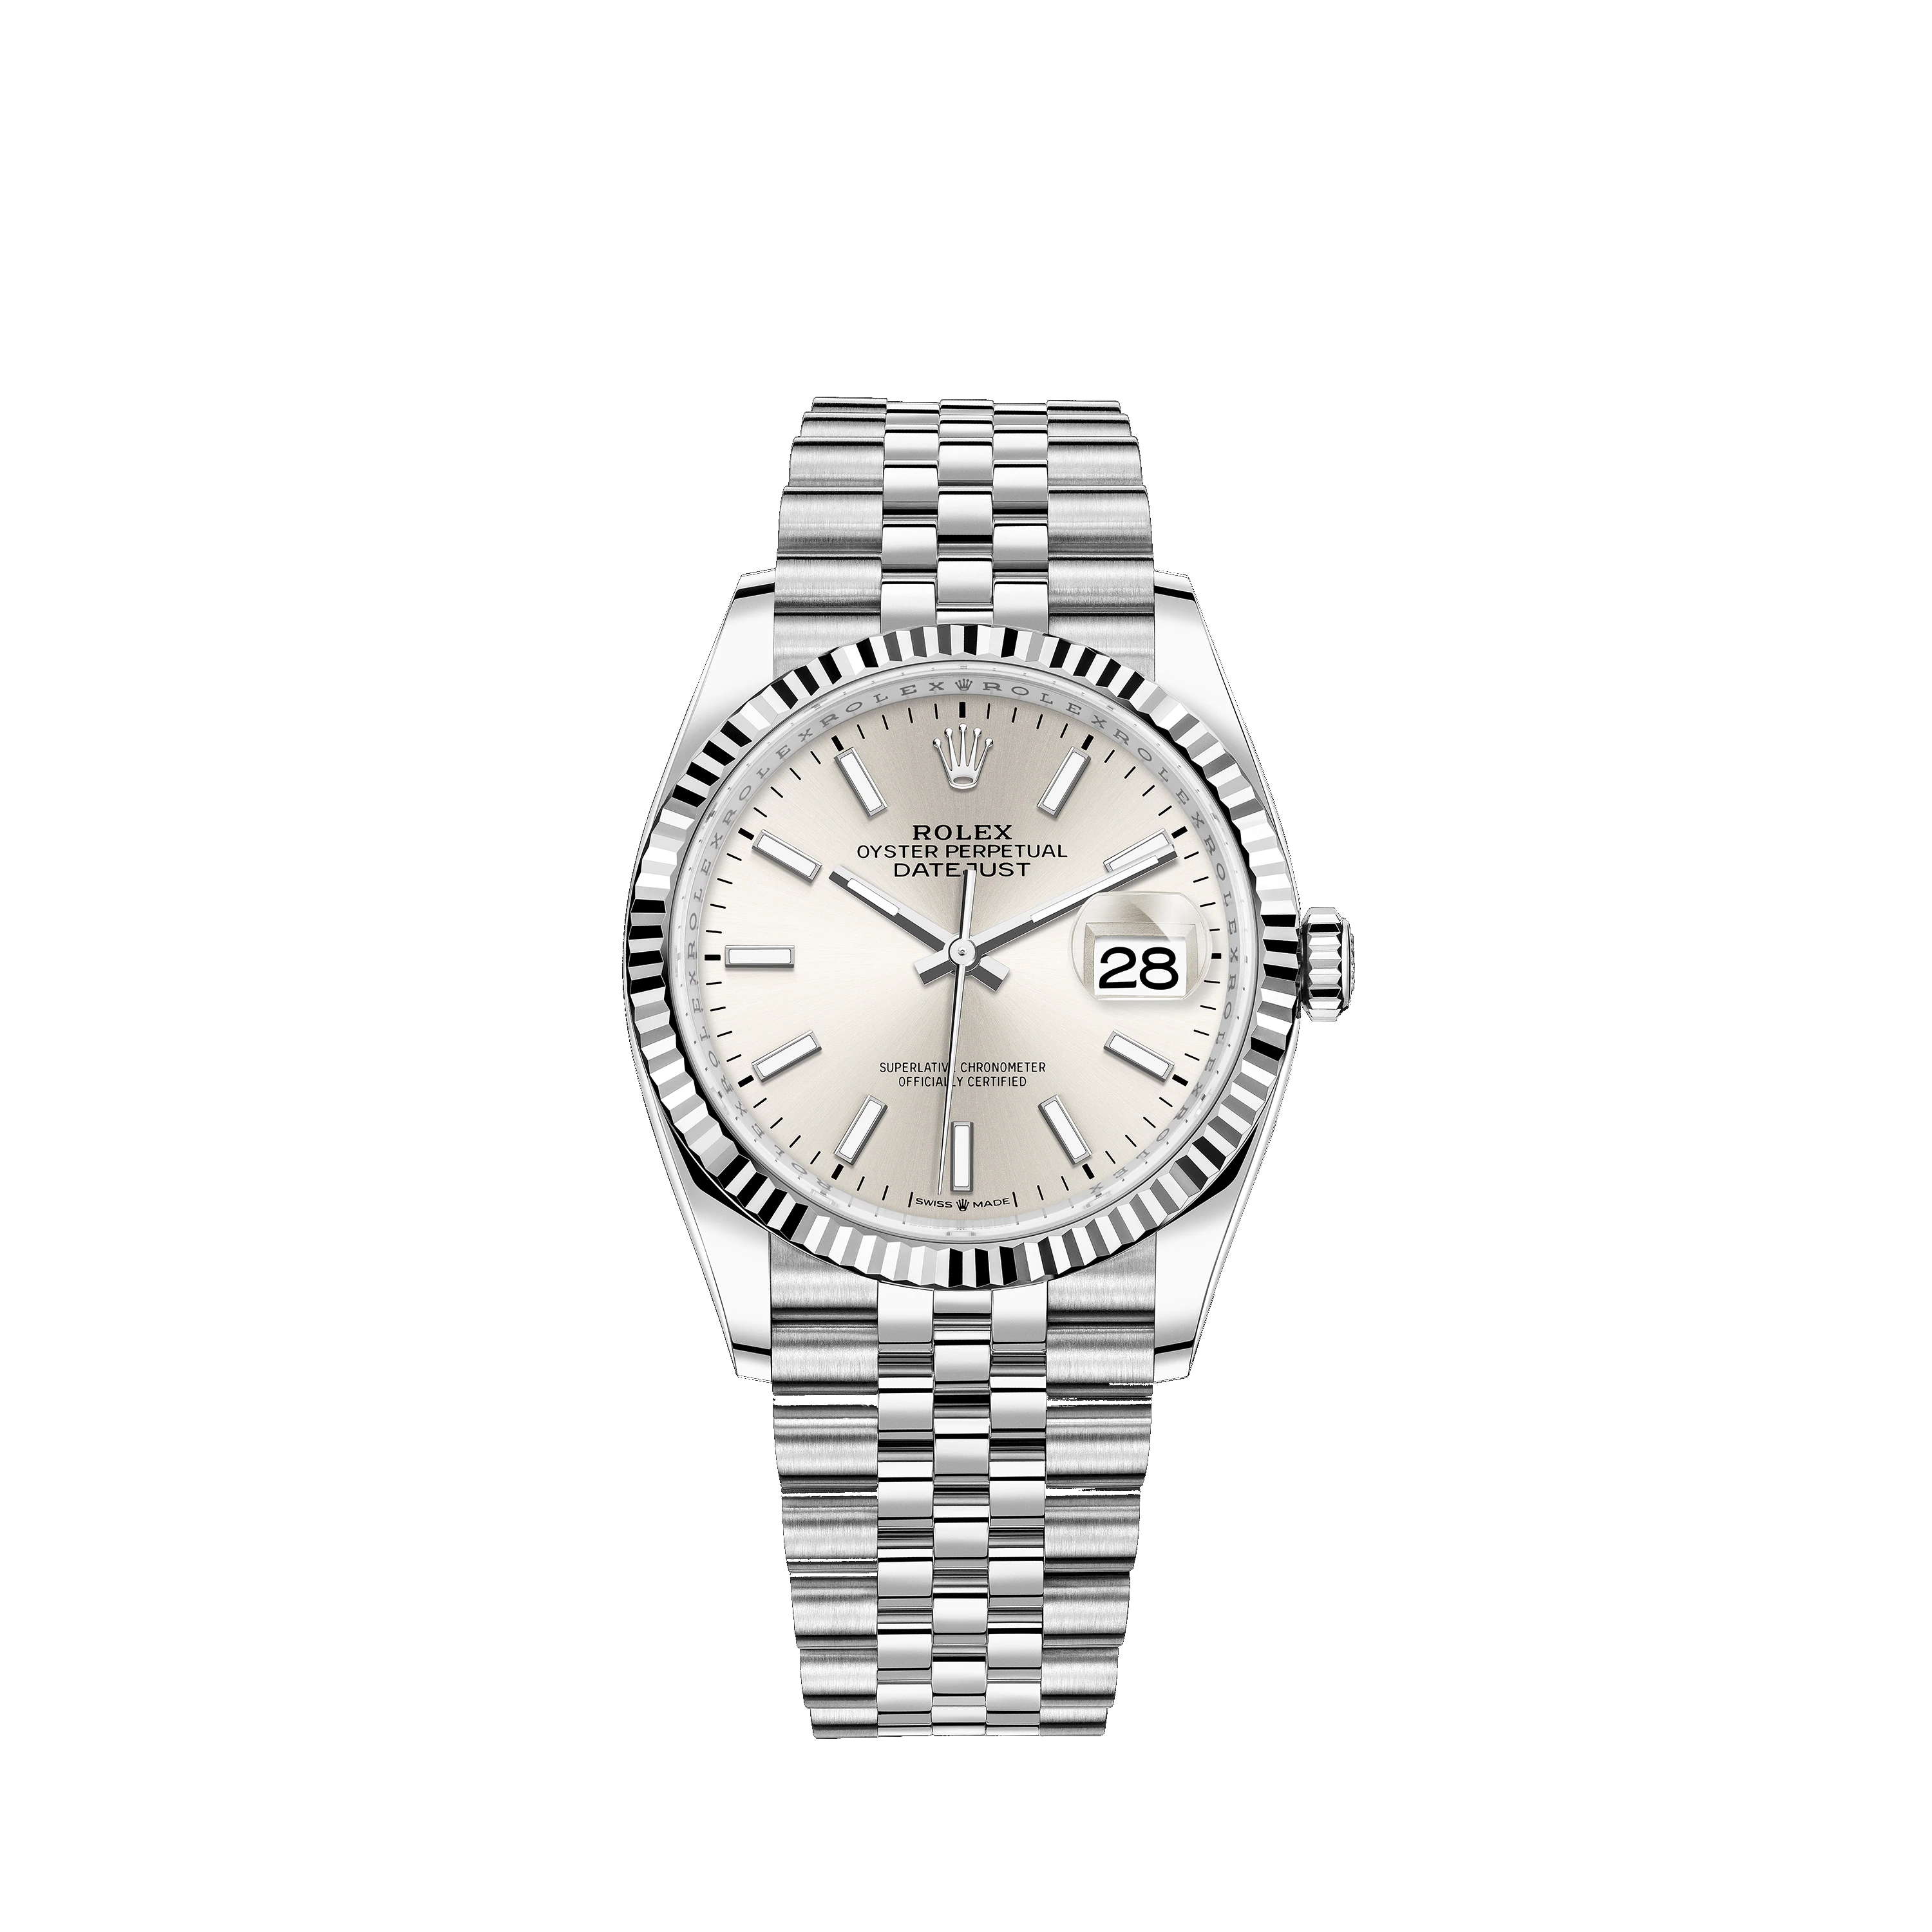 Datejust 36 126234 White Gold & Stainless Steel Watch (Silver)